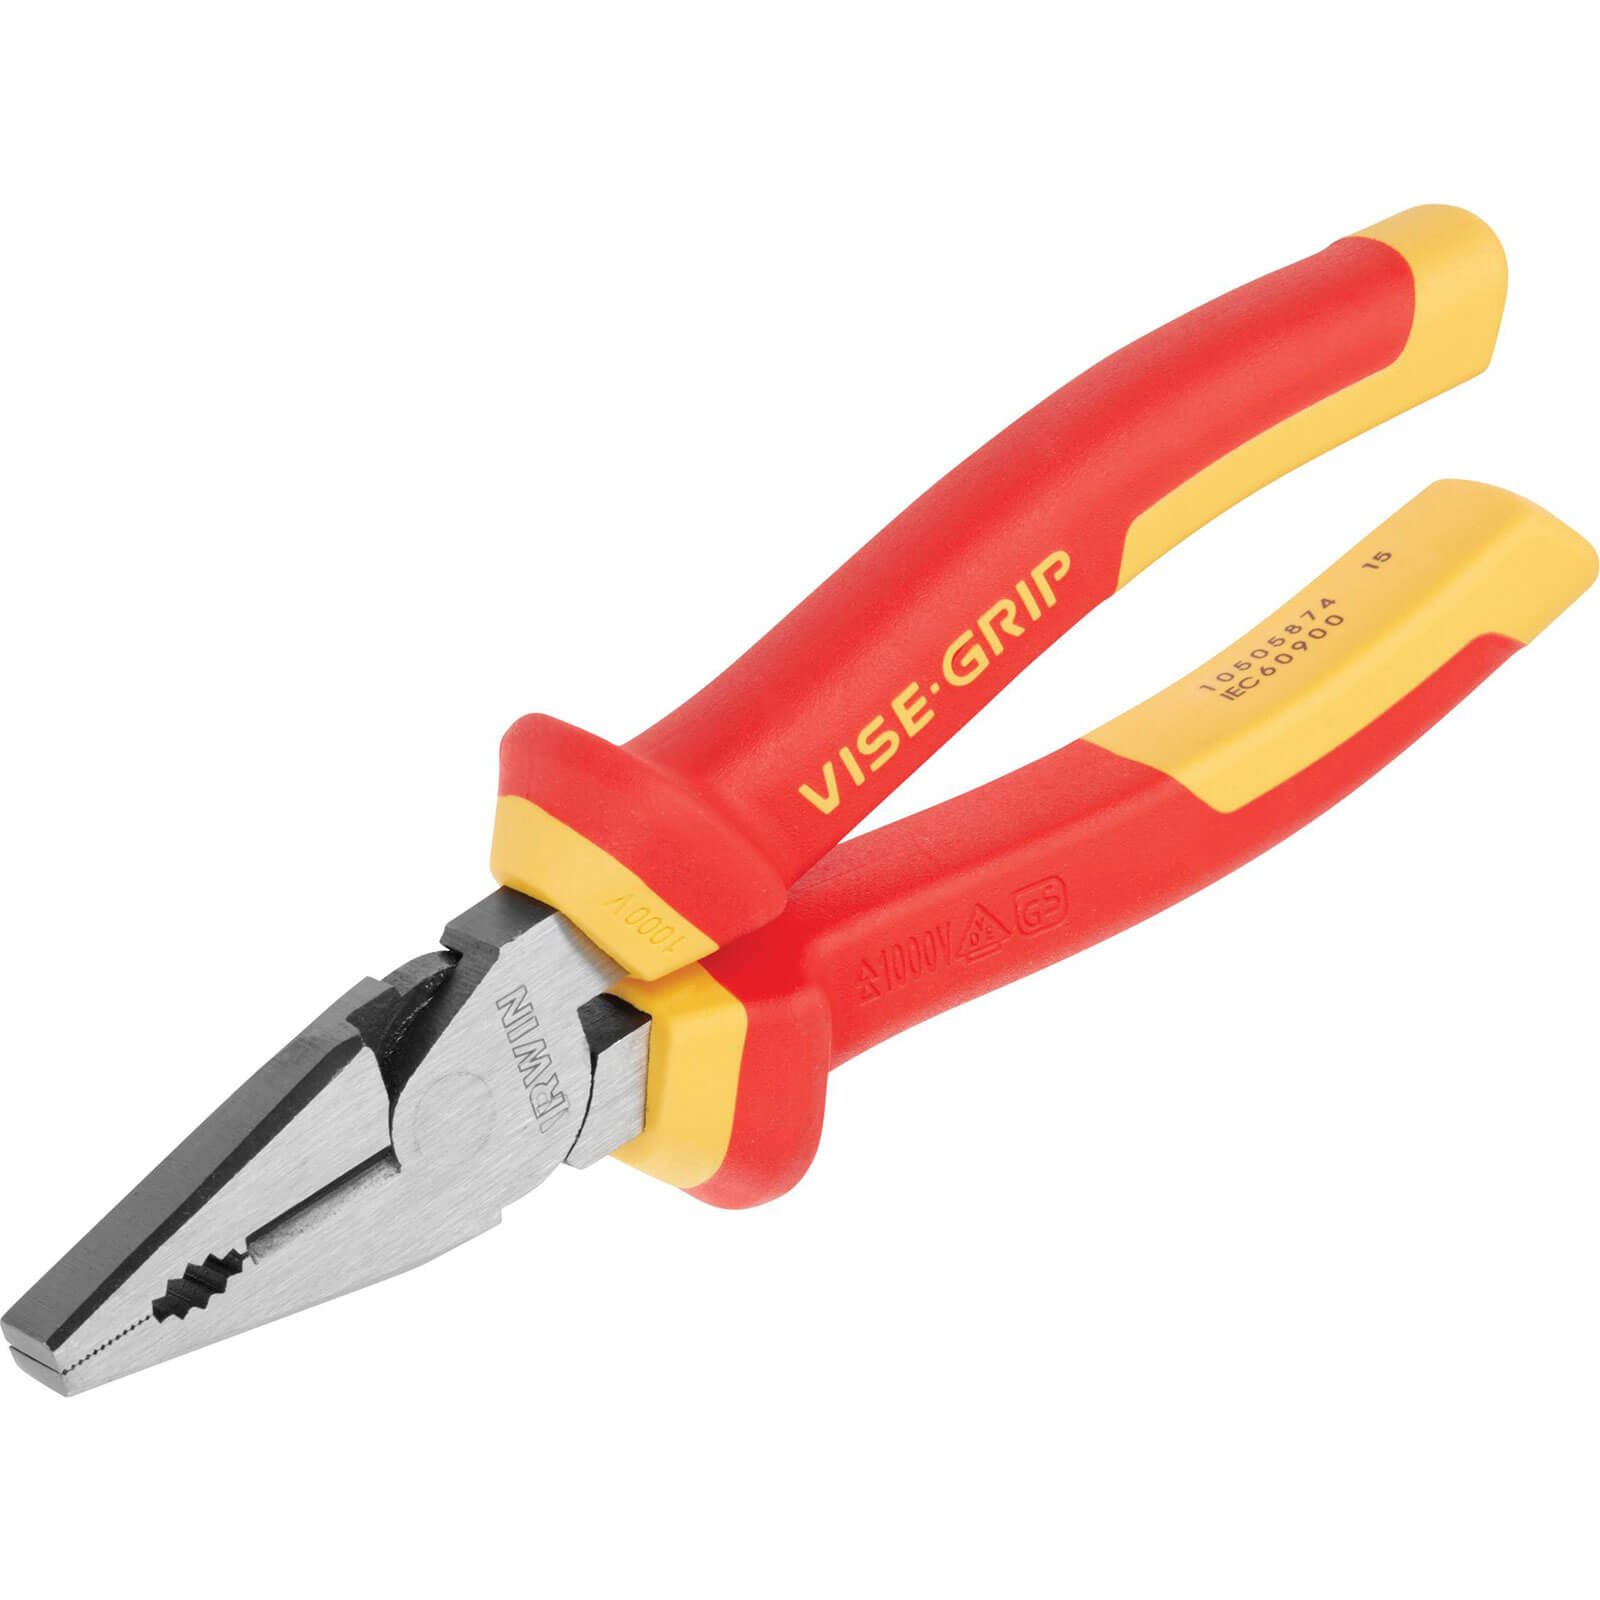 Image of Vise-Grip VDE Insulated High Leverage Combination Pliers 200mm